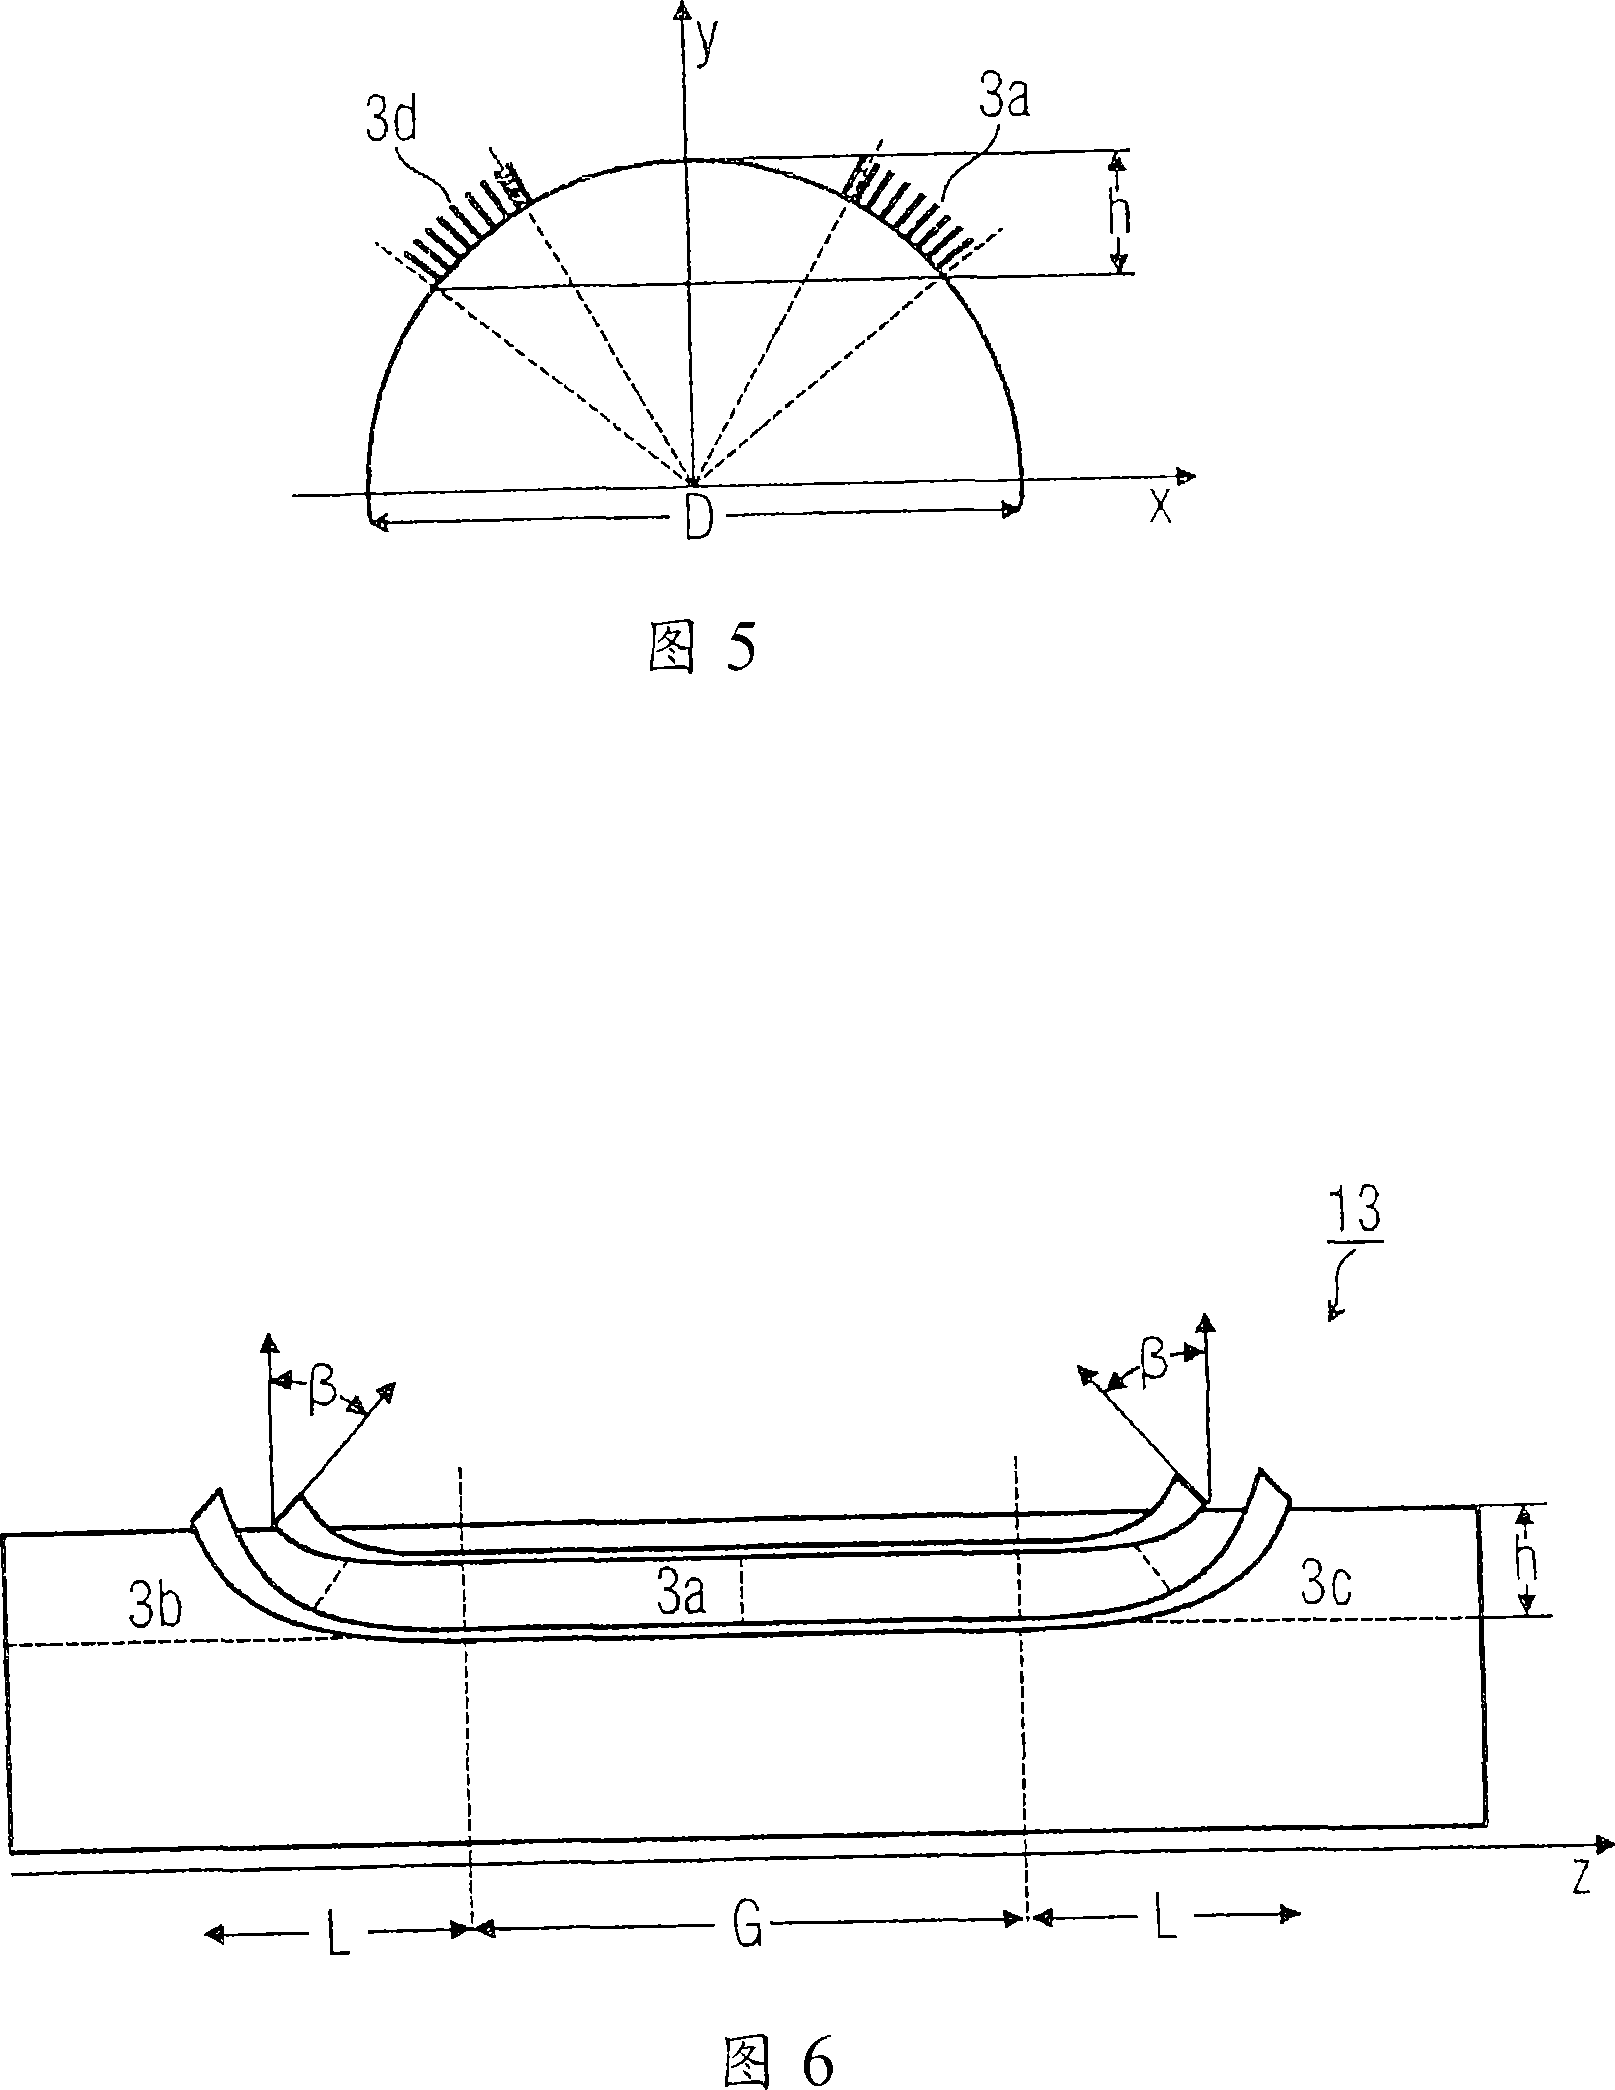 Saddle-shaped coil winding using superconductors, and method for the production thereof